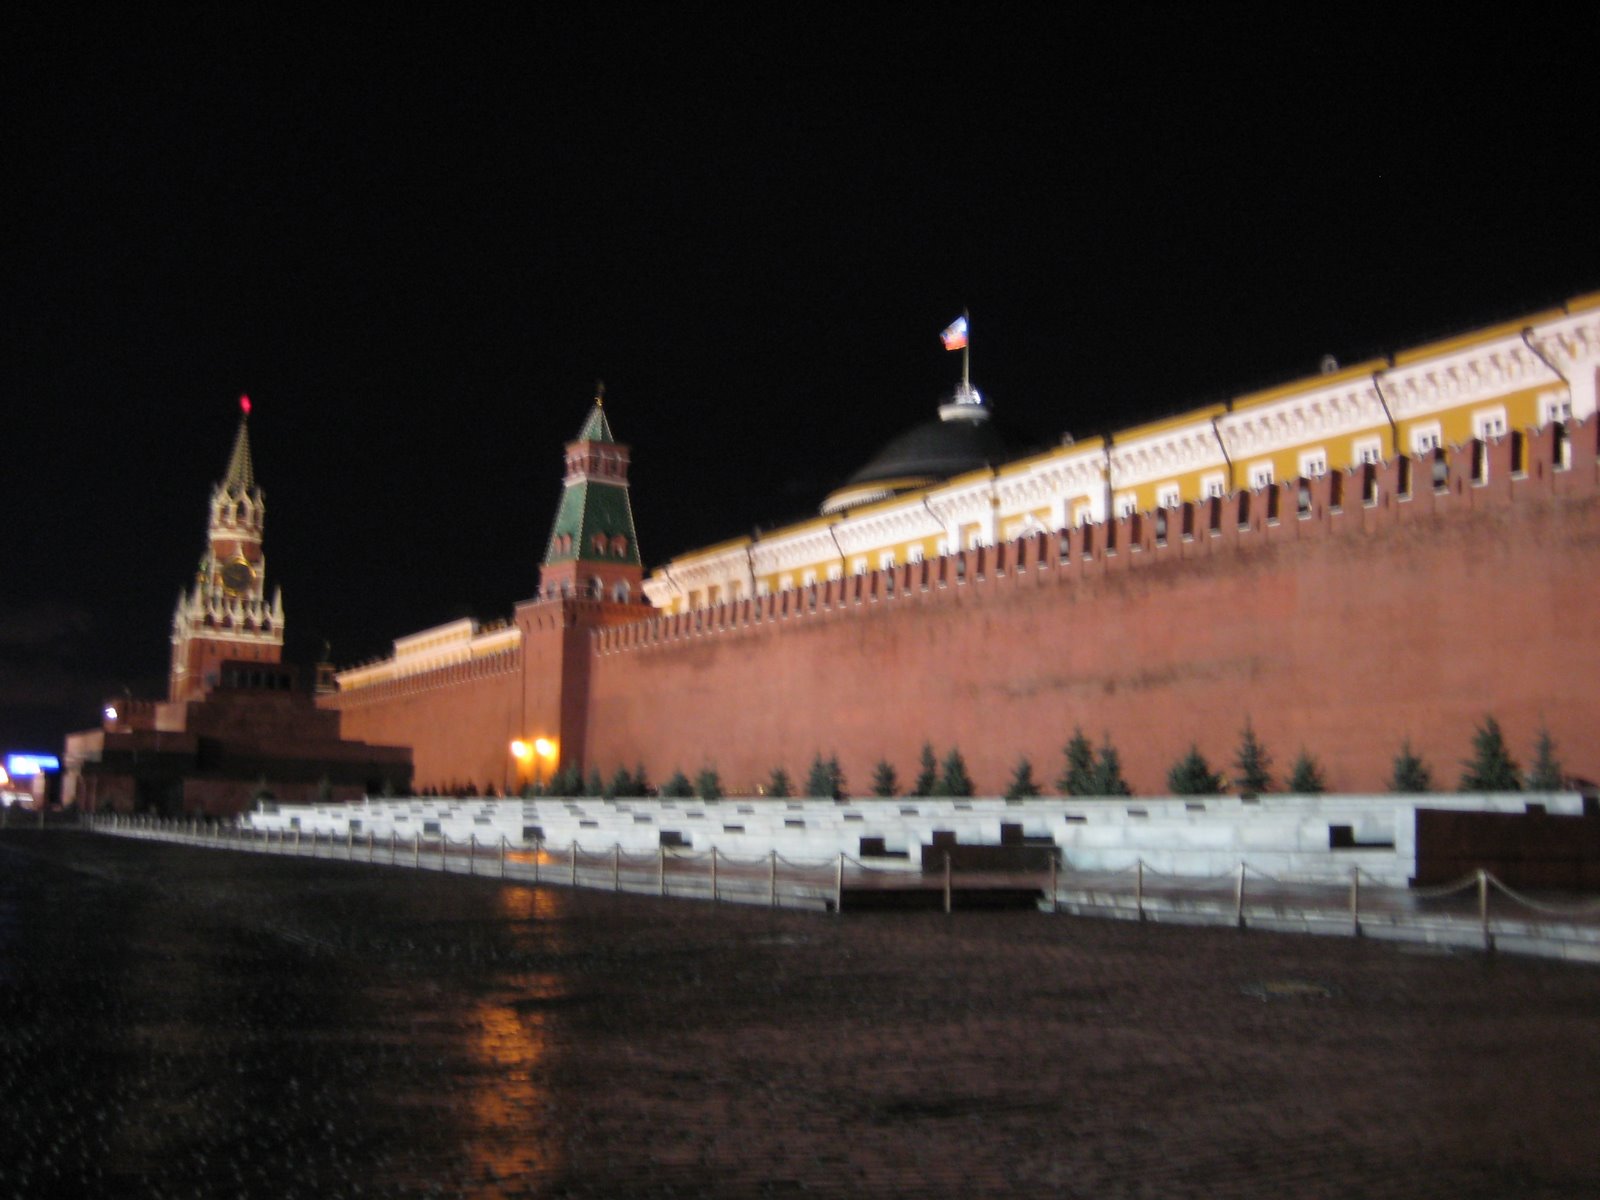 [Part+of+the+Kremlin+Wall+with+Lenin's+Mausoleum+to+the+left,+Red+Square,+Moscow.JPG]